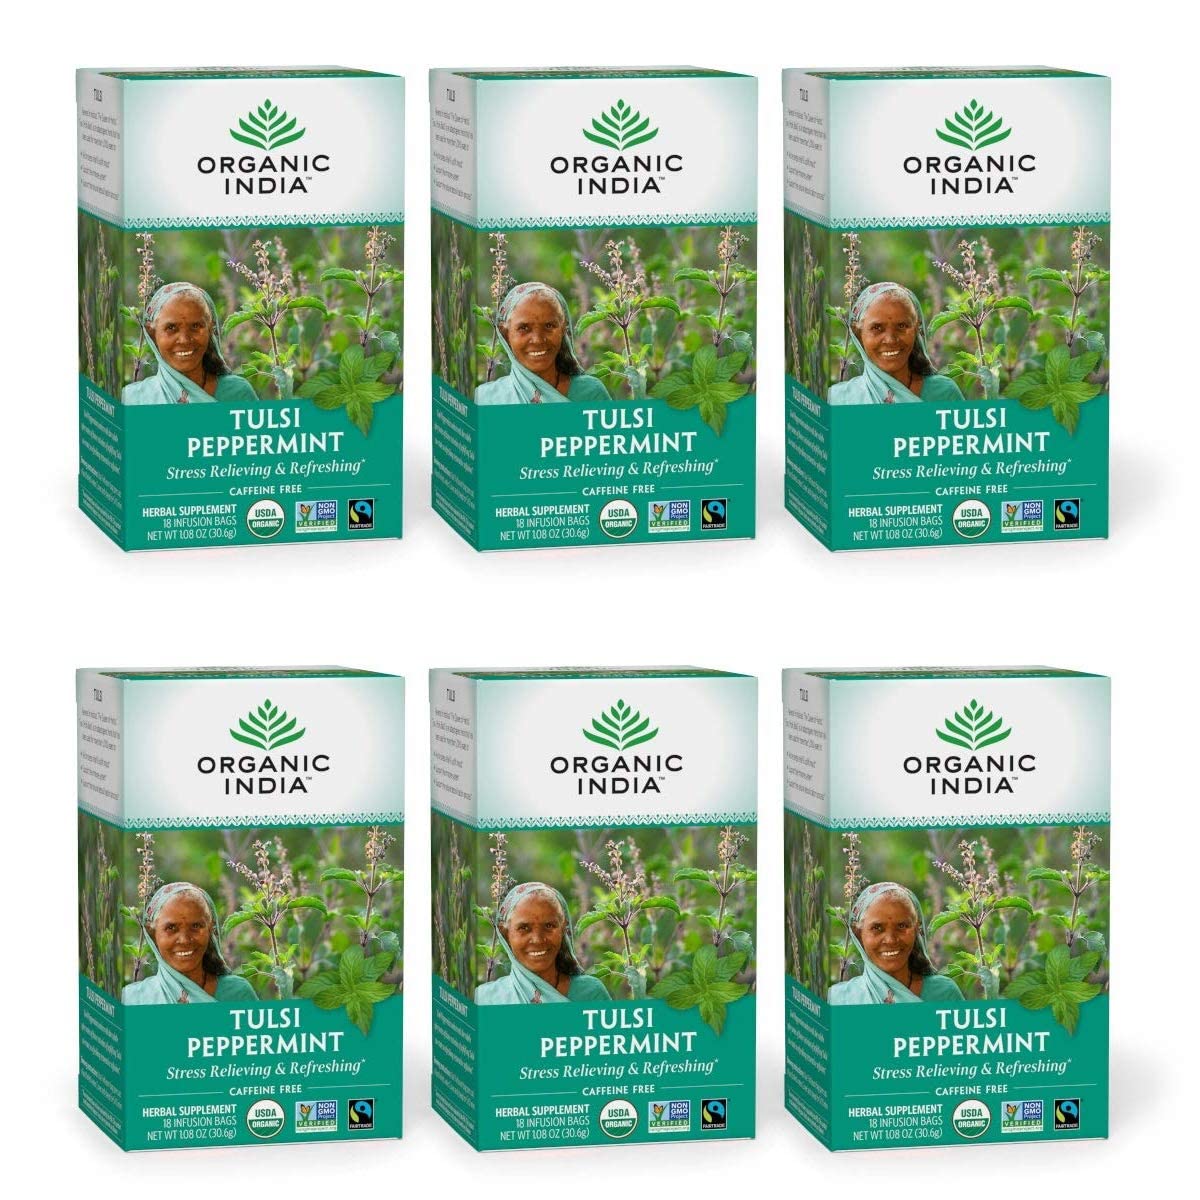 Organic India Tulsi Peppermint Herbal Tea - Holy Basil, Stress Relieving & Refreshing, Immune Support, Aids Digestion, Vegan, USDA Certified Organic, Caffeine-Free - 18 Infusion Bags, 6 Pack